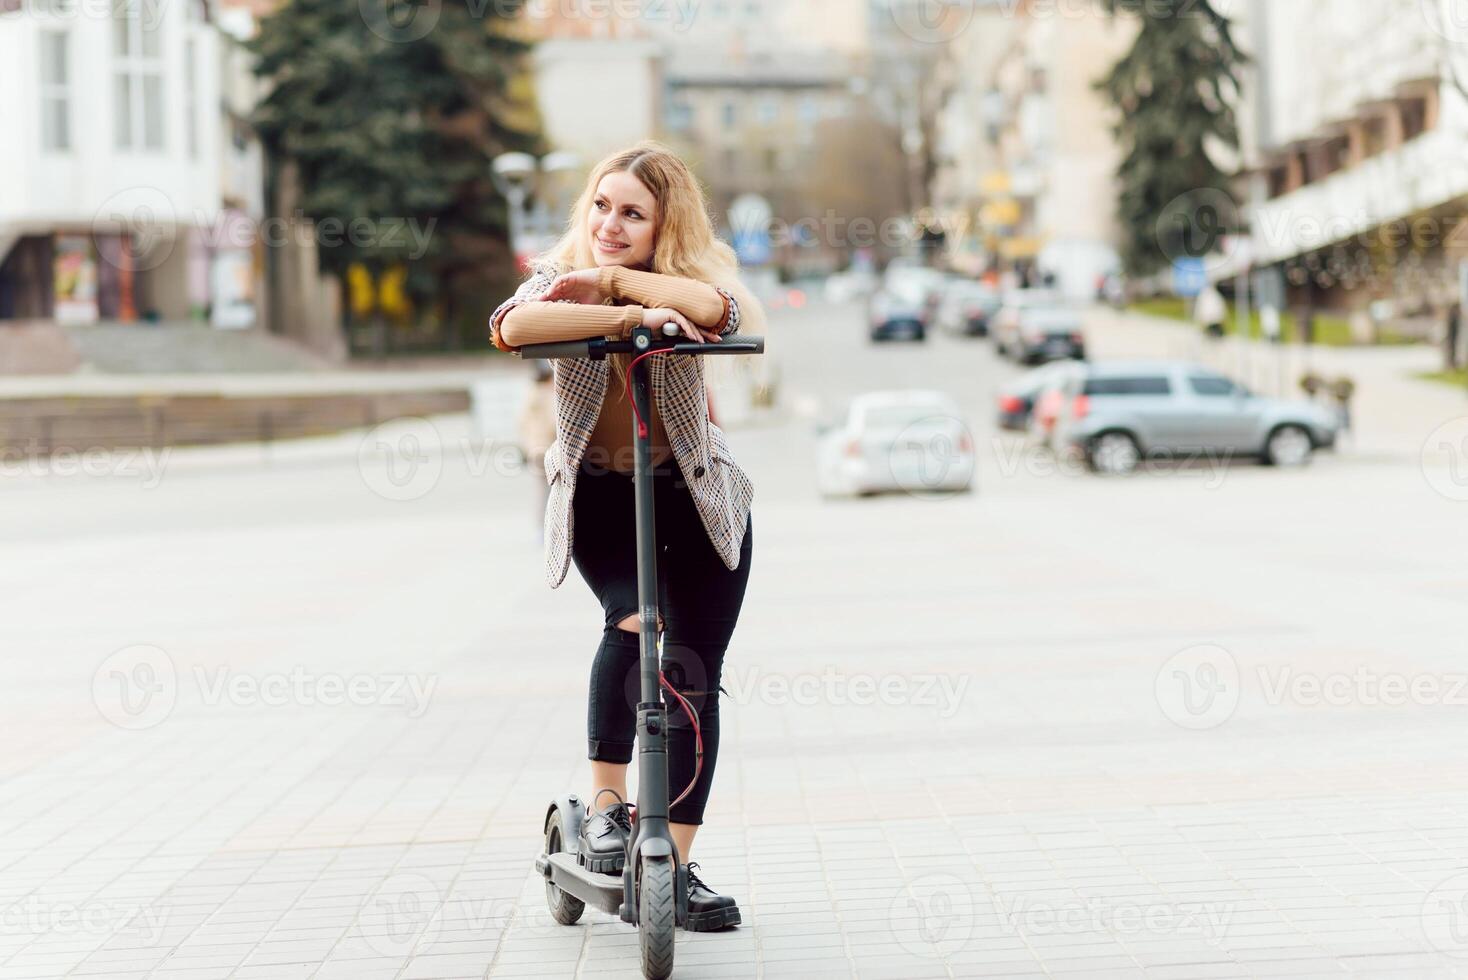 Girl in electric scooter riding in the old city center photo